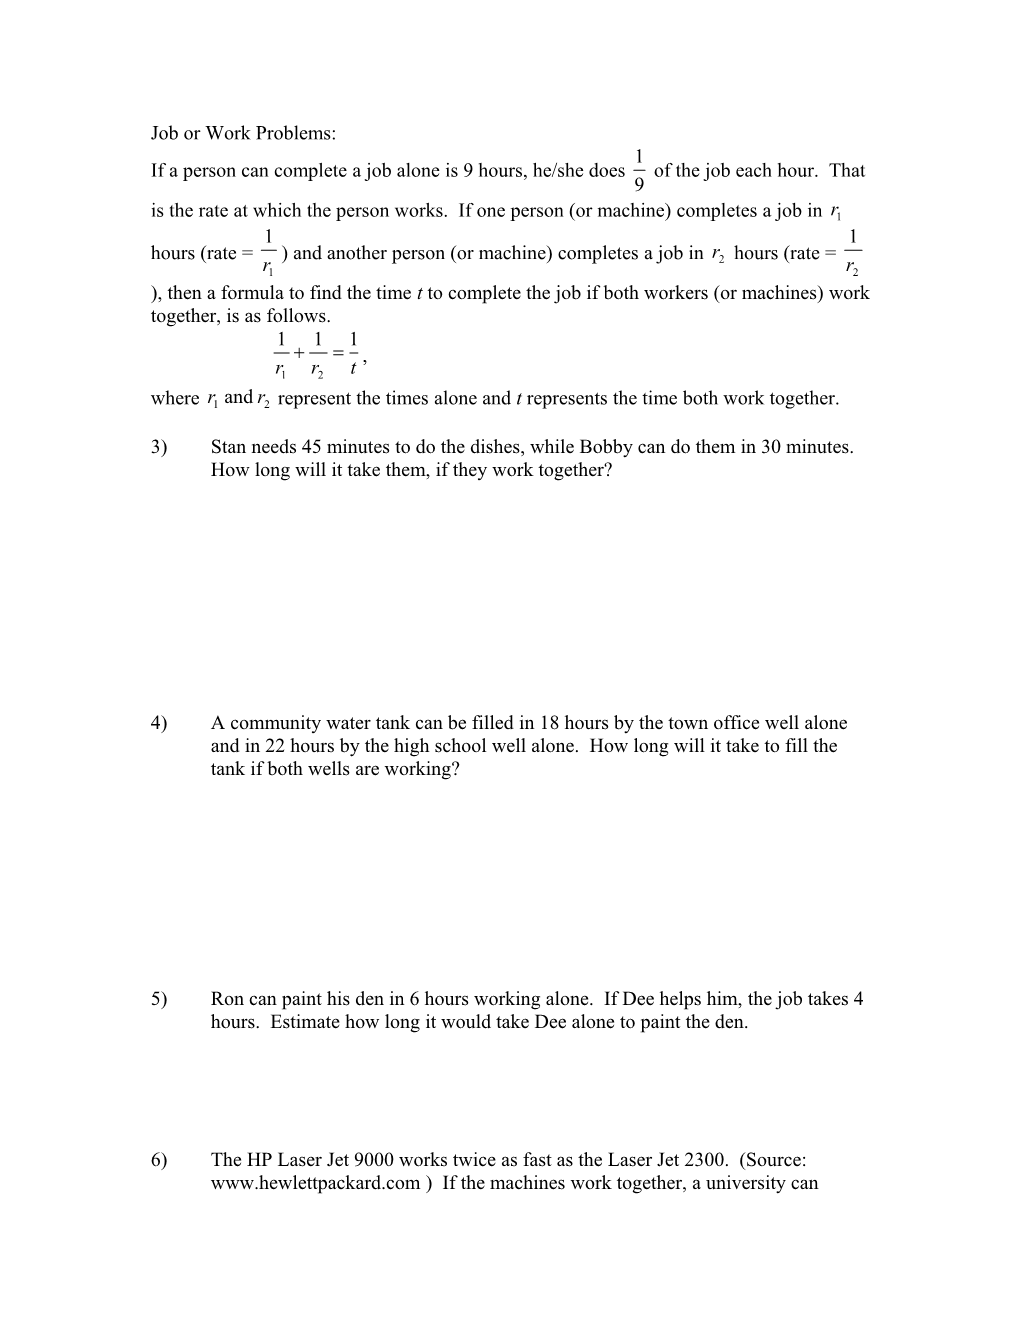 Application Problems Using Rational Equations